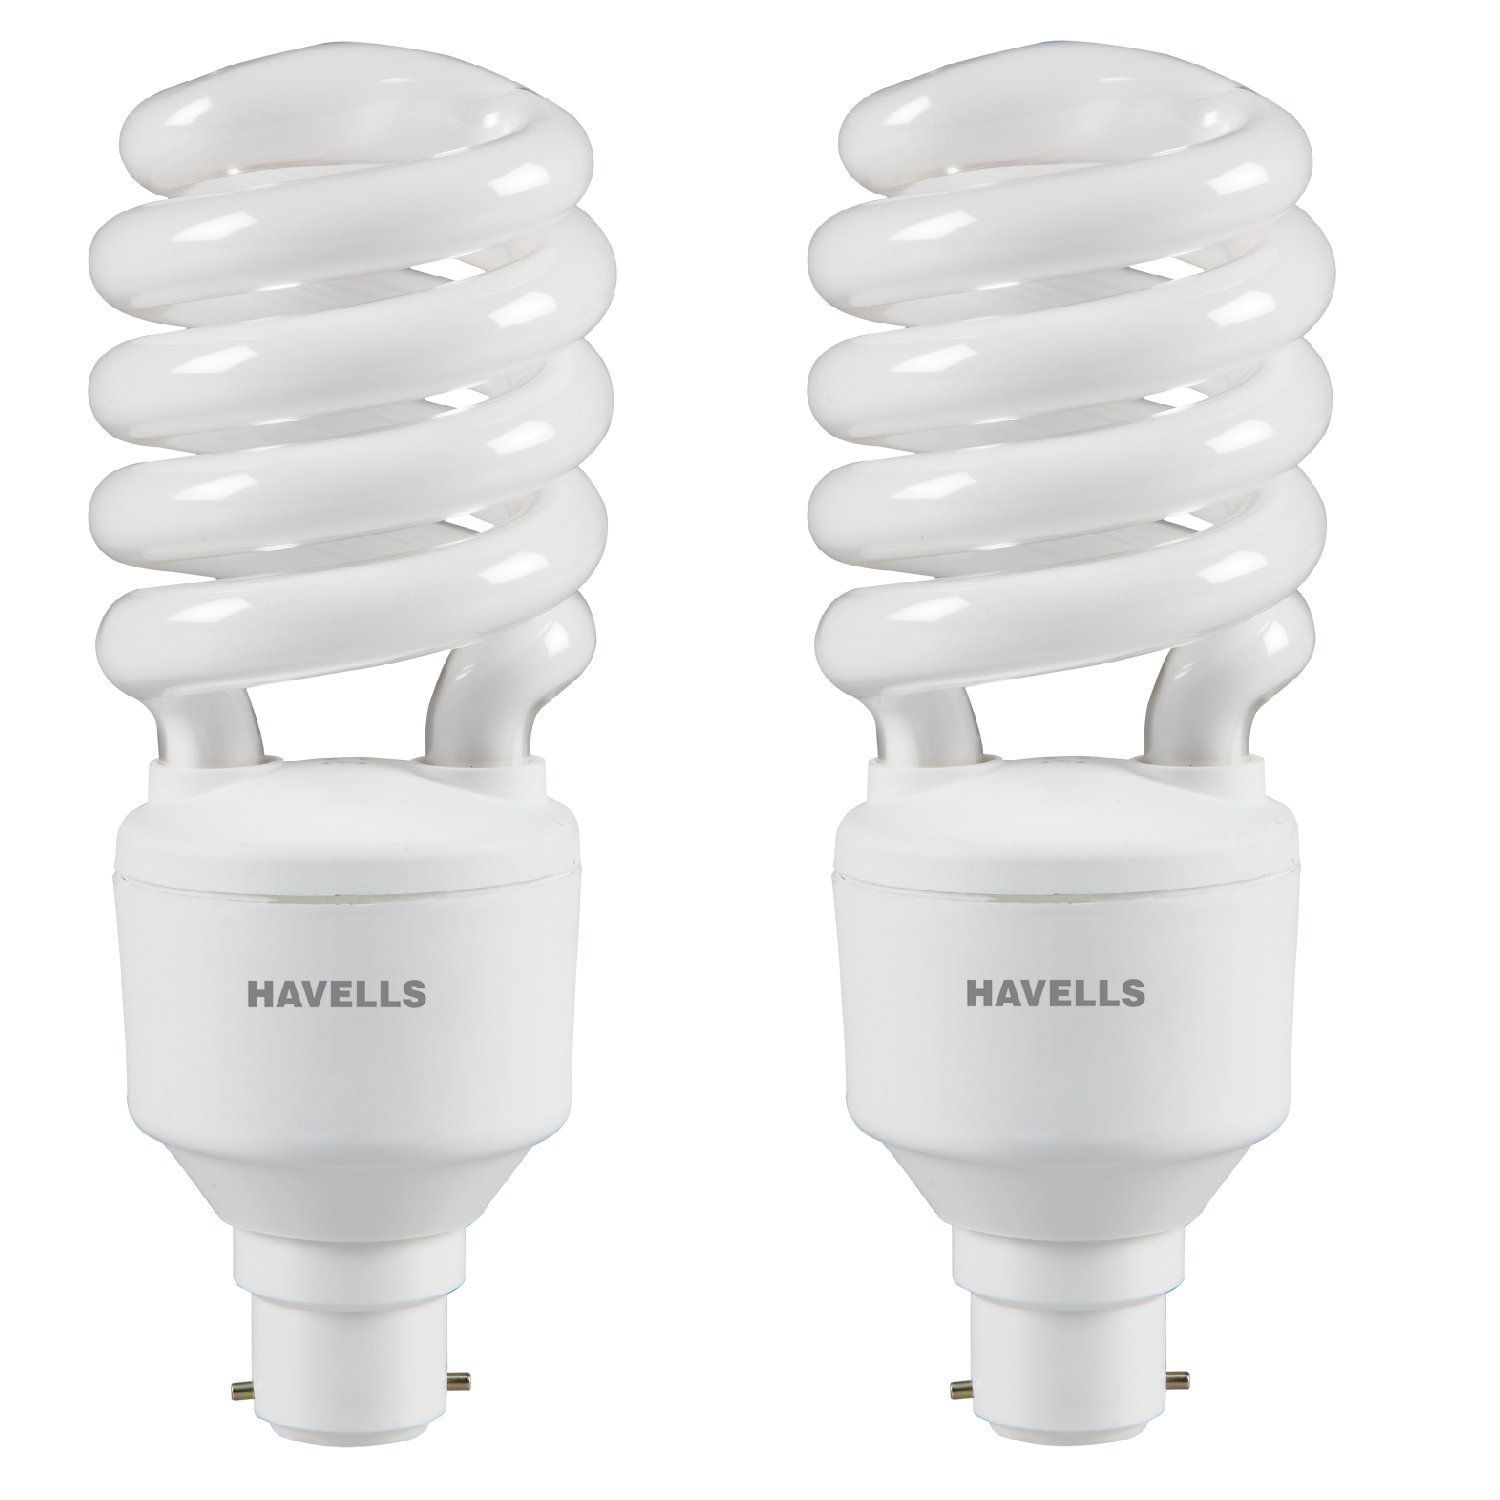 Buy Havells SP B-22 27-Watt CFL Bulb (Cool Day Light and Pack of 2 ...